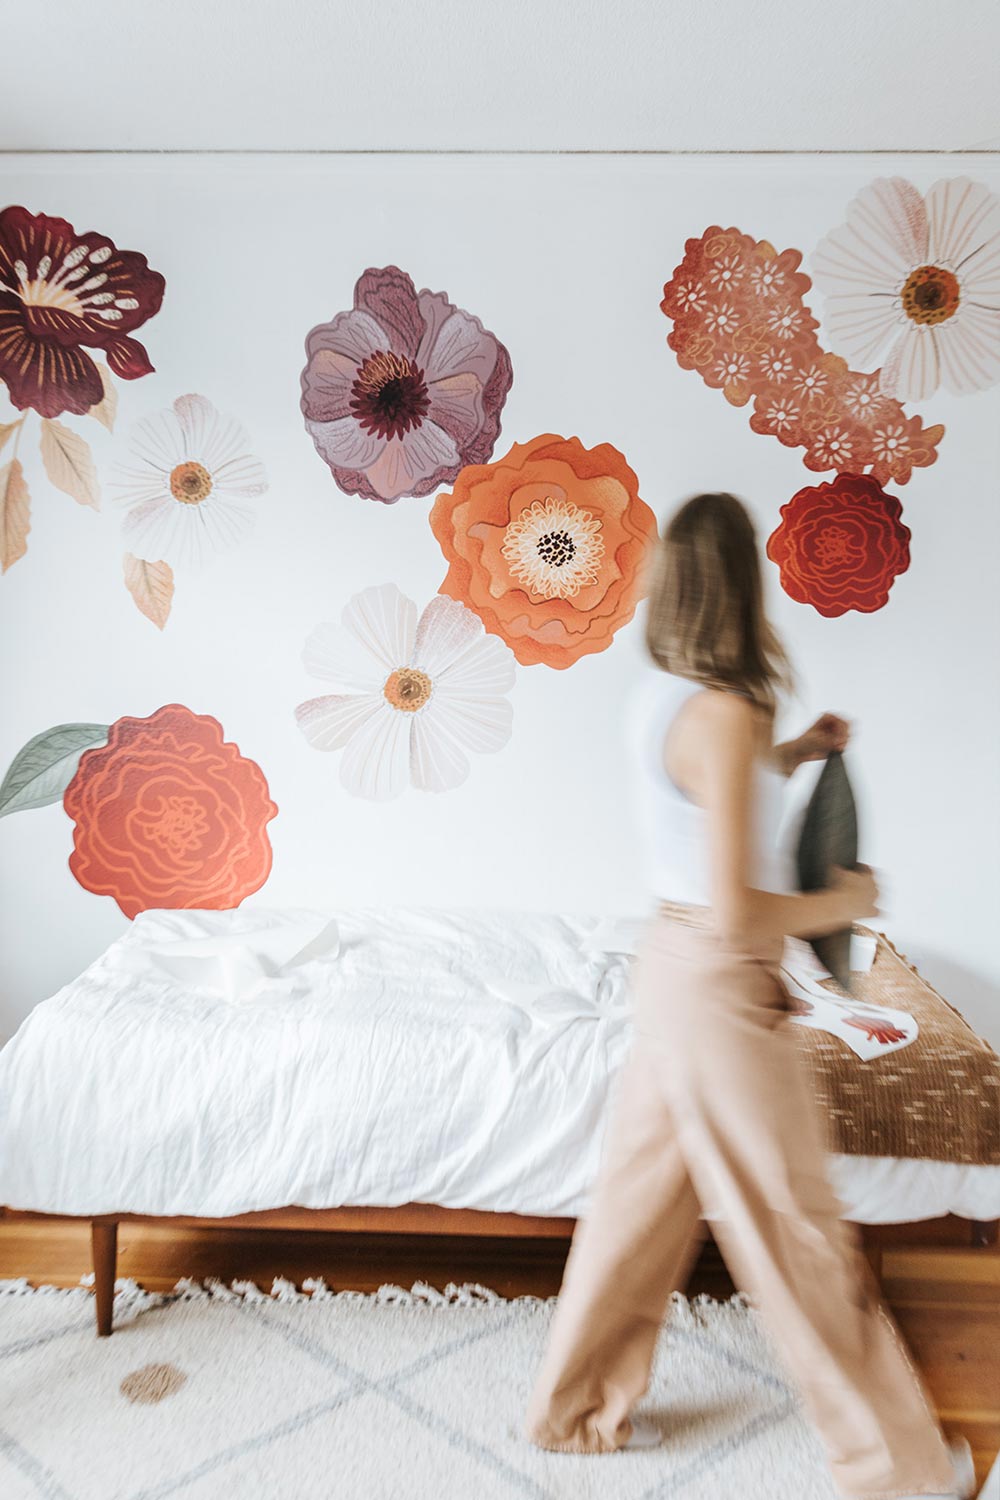 Danielle moving leaf wall decal over to the right side of the room.